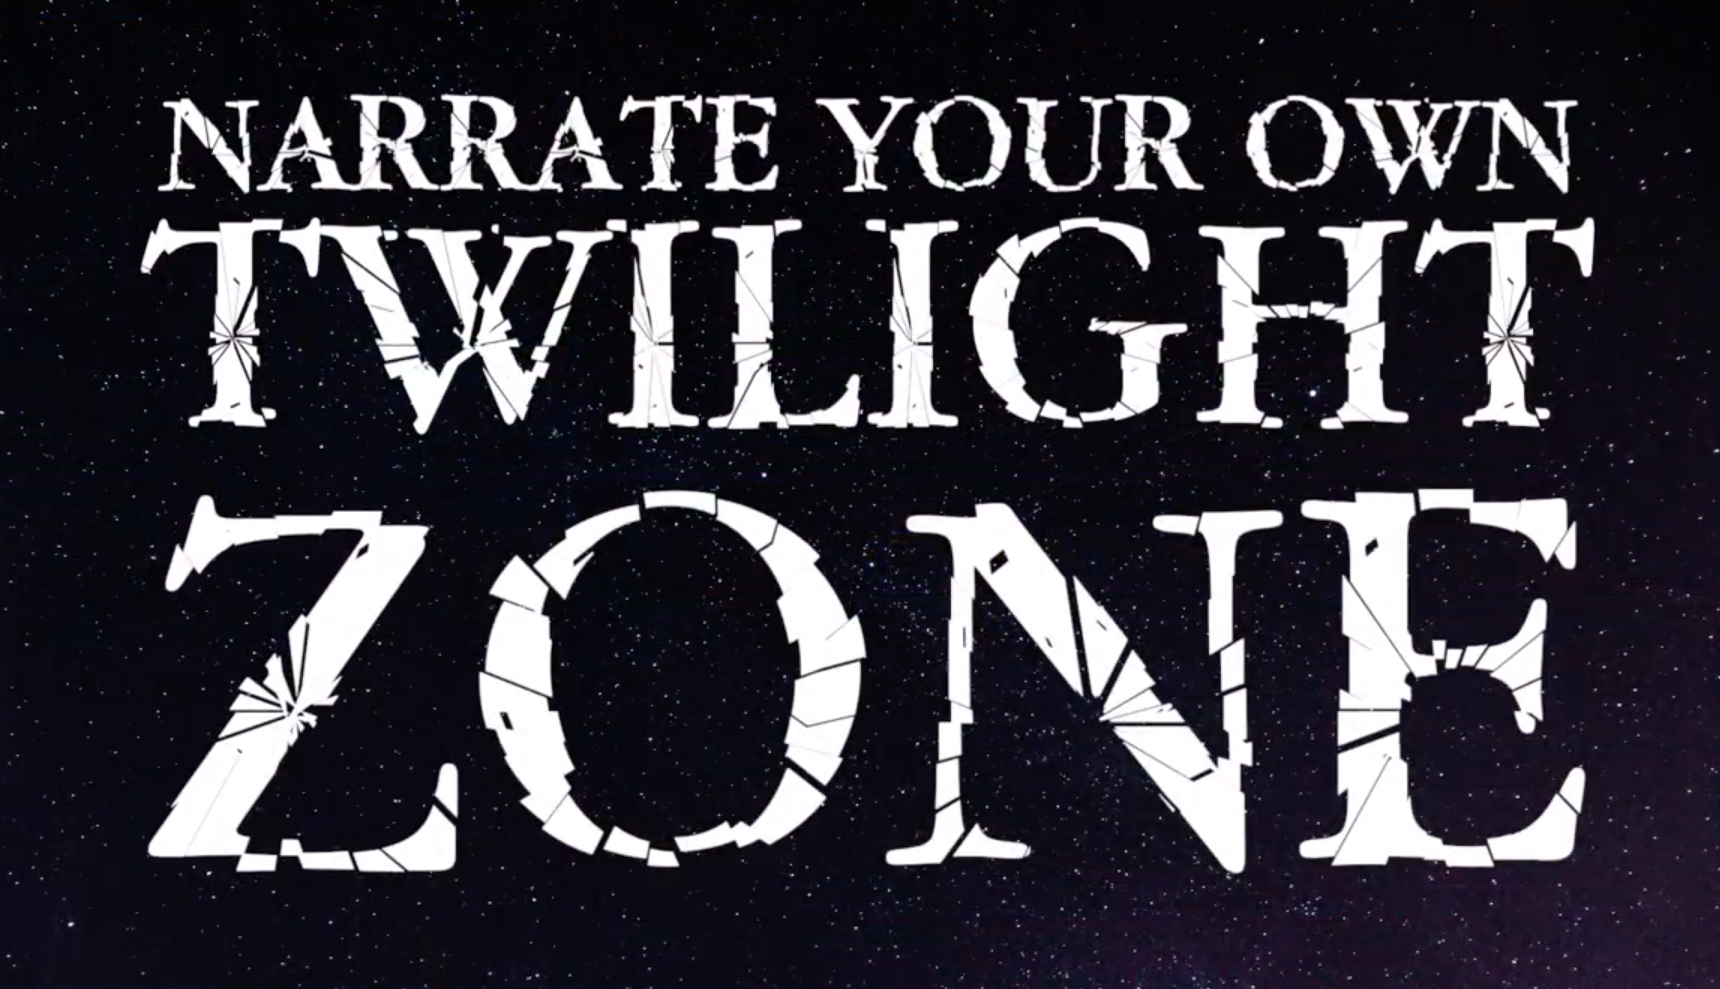 Narrate Your Own Twilight Zone